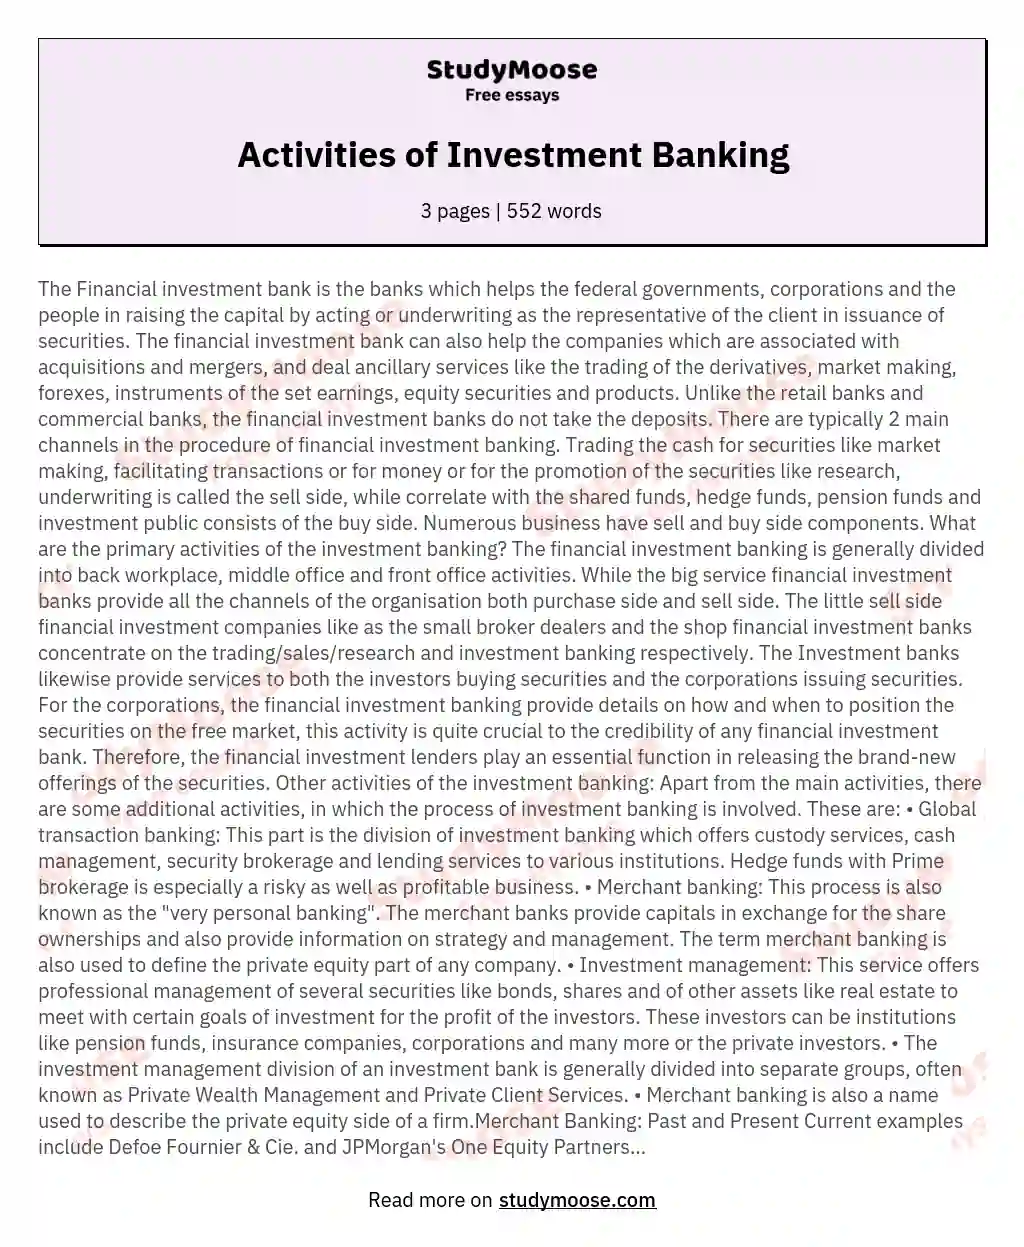 Activities of Investment Banking essay